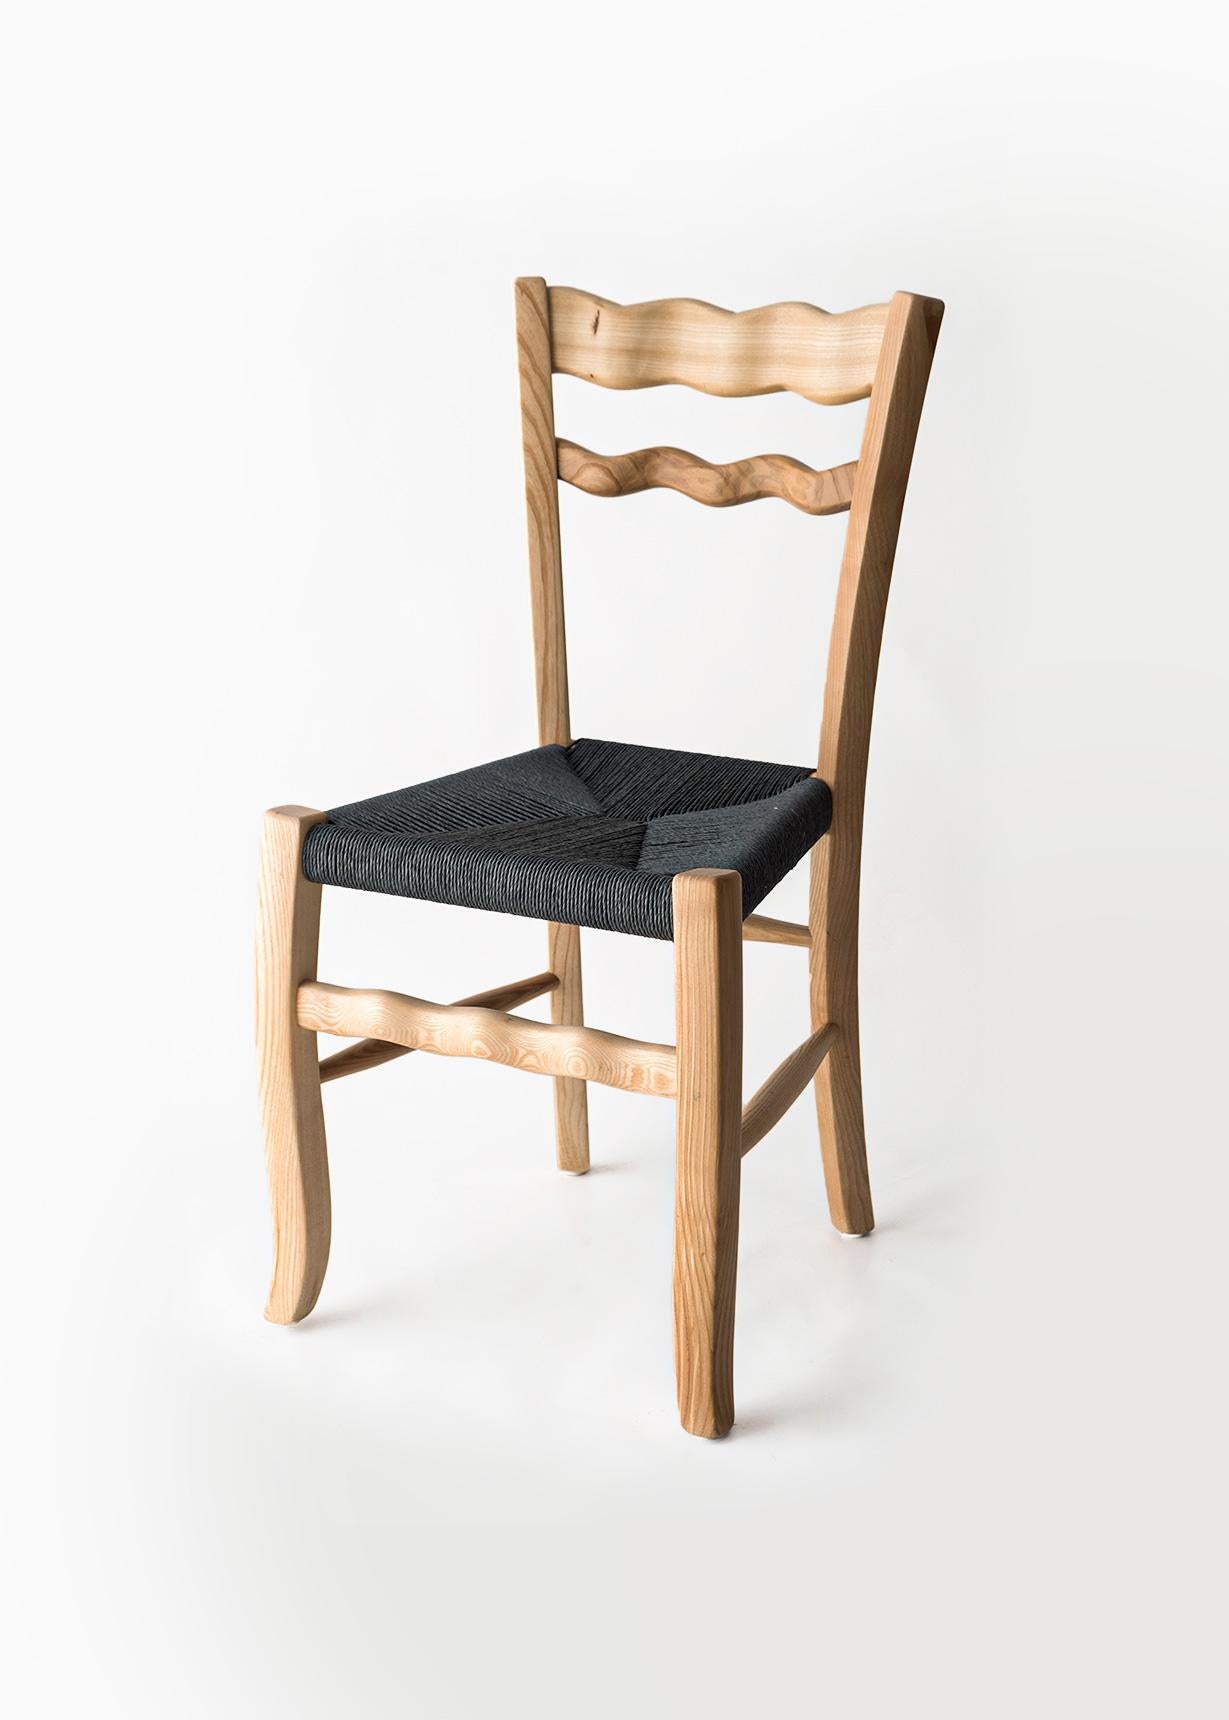 The vernacular archetype of the countryside chair has been redesigned by the Italian designer Antonio Aricò and made by MYOP, a Sicilian based family company, known around the world for its eclectic approach to craftsmanship furniture and